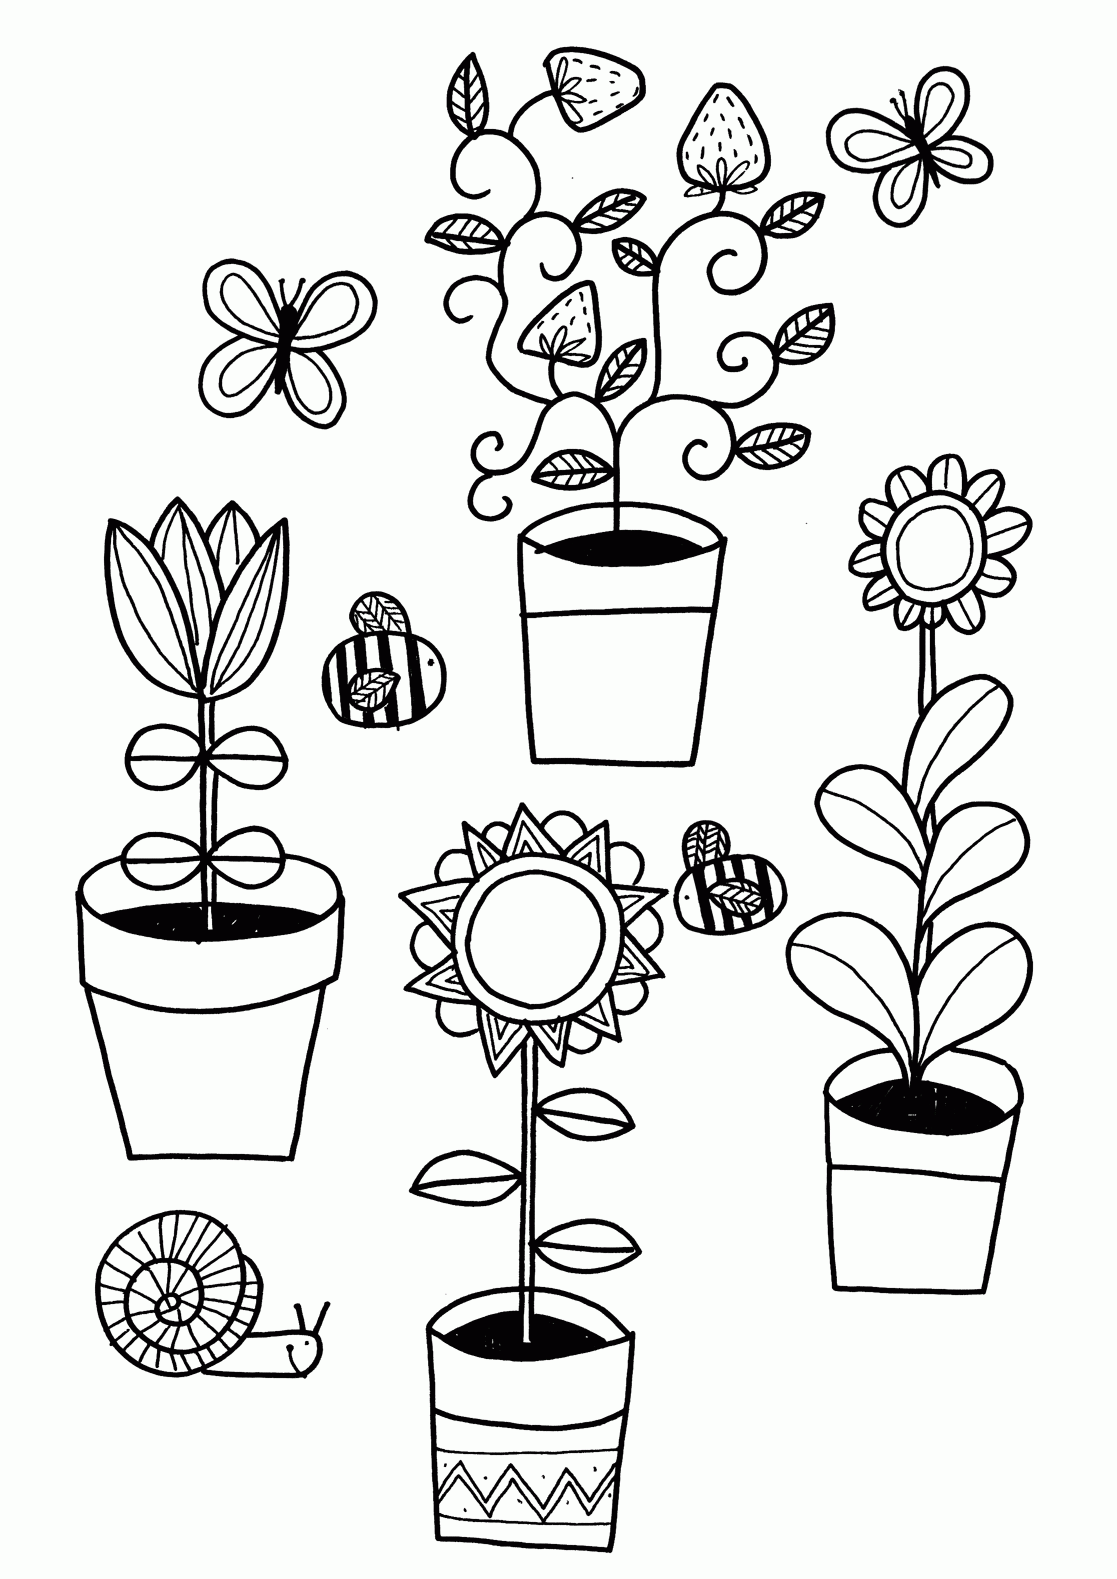 Free Planting Coloring Pages Download Free Planting Coloring Pages Png Images Free ClipArts On